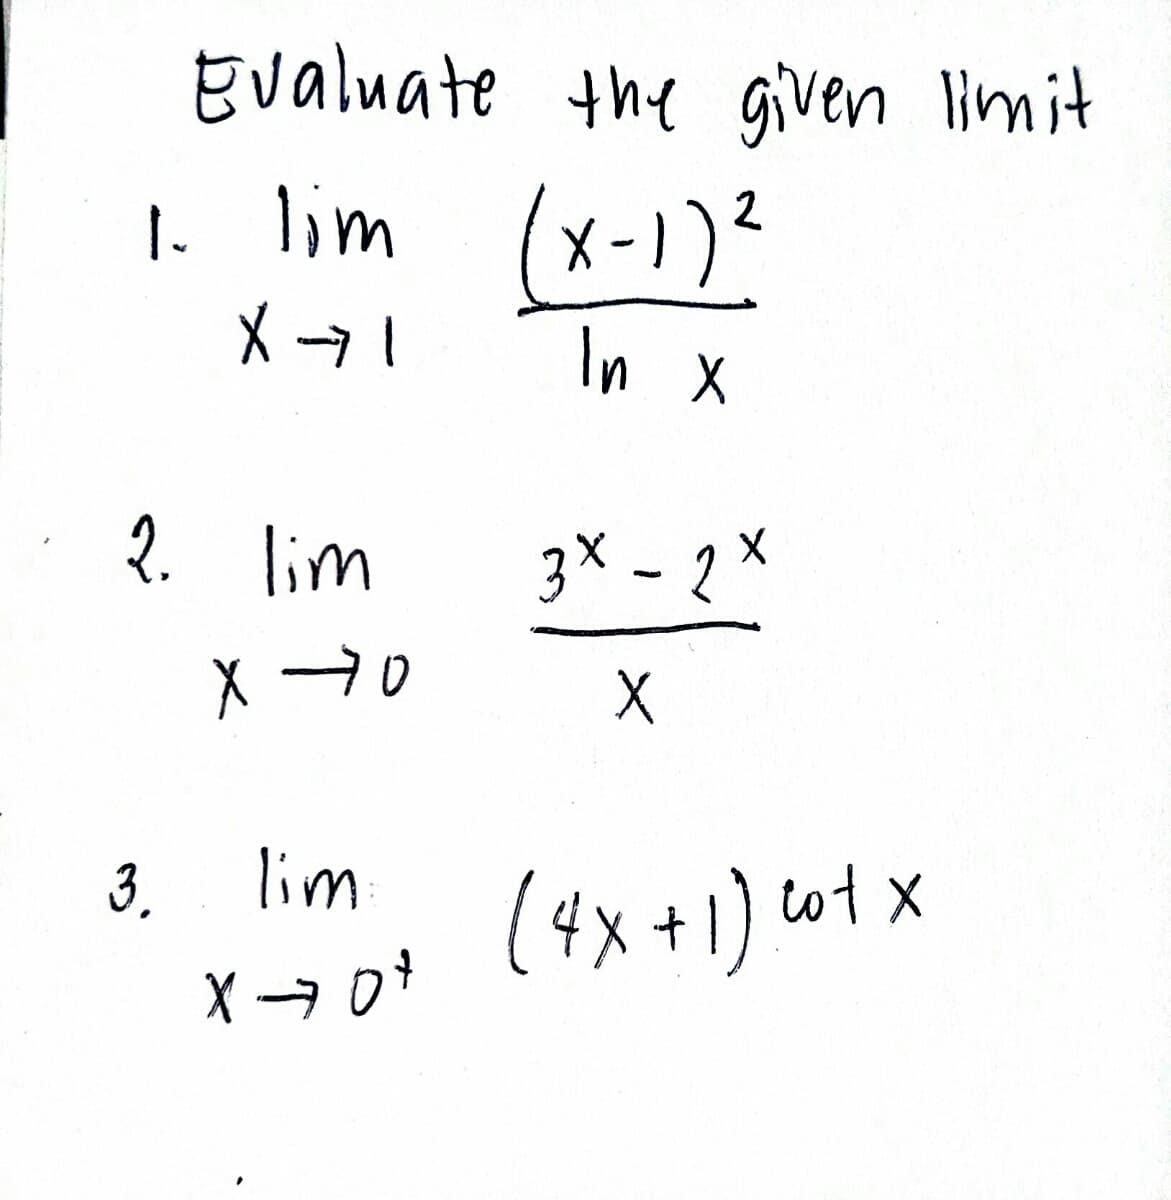 Evaluate the given limit
1. lim (x-1)2
In x
2. lim
3X - 2 ×
3.
lim
(4x+1) ot x
